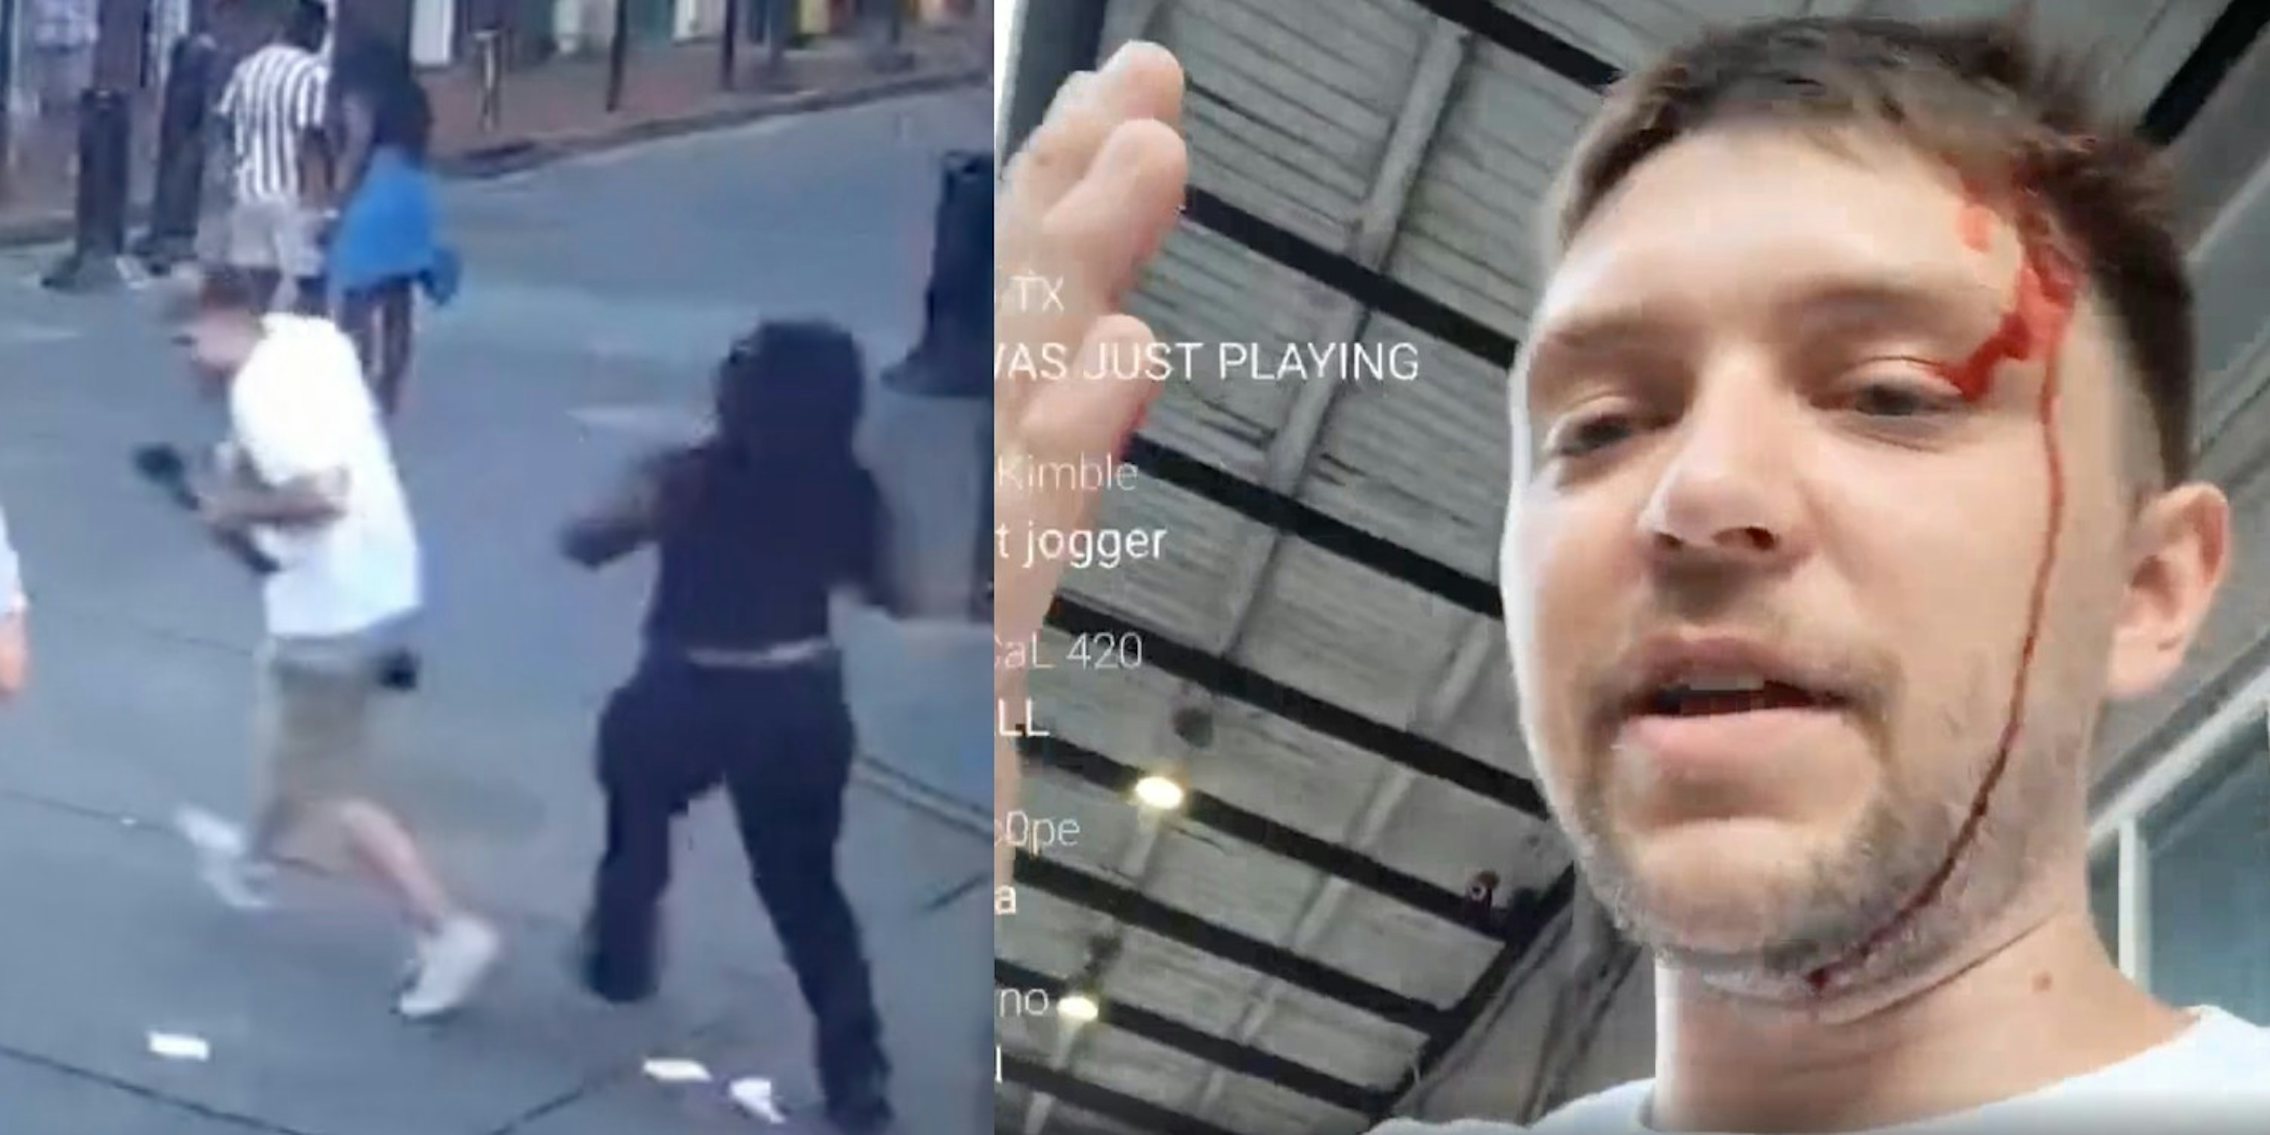 (L-R): Video shows Black security guard about to strike white streamer after he called her the N-word; the streamer complains about being assaulted